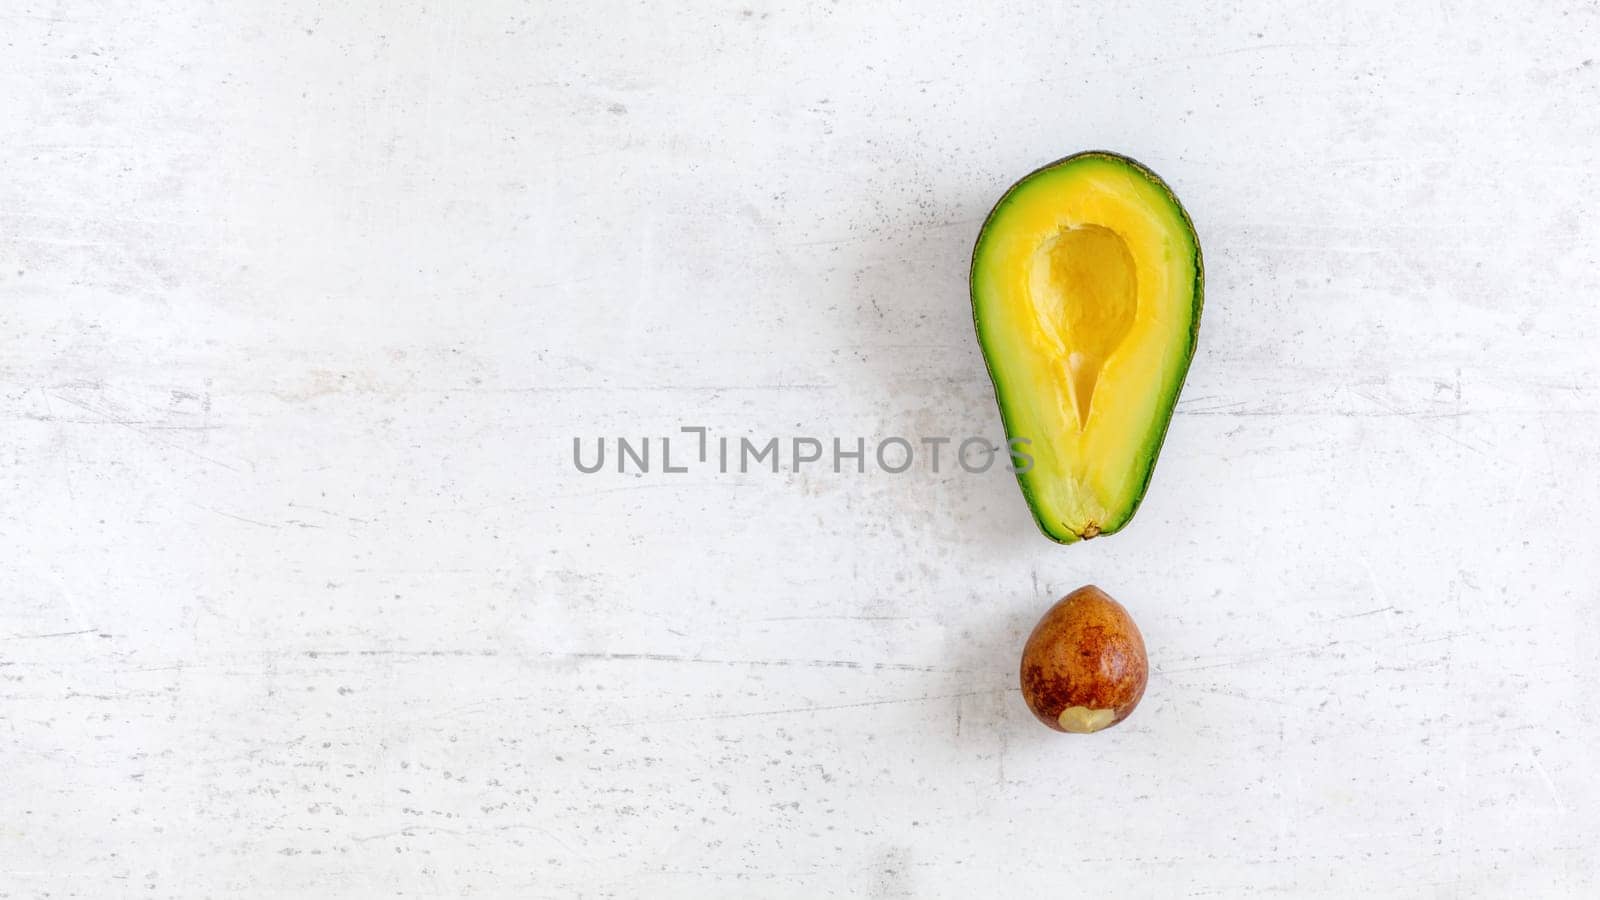 Exclamation mark made of avocado half and seed, on white board, photo from above. Wide banner with space for text on left side.